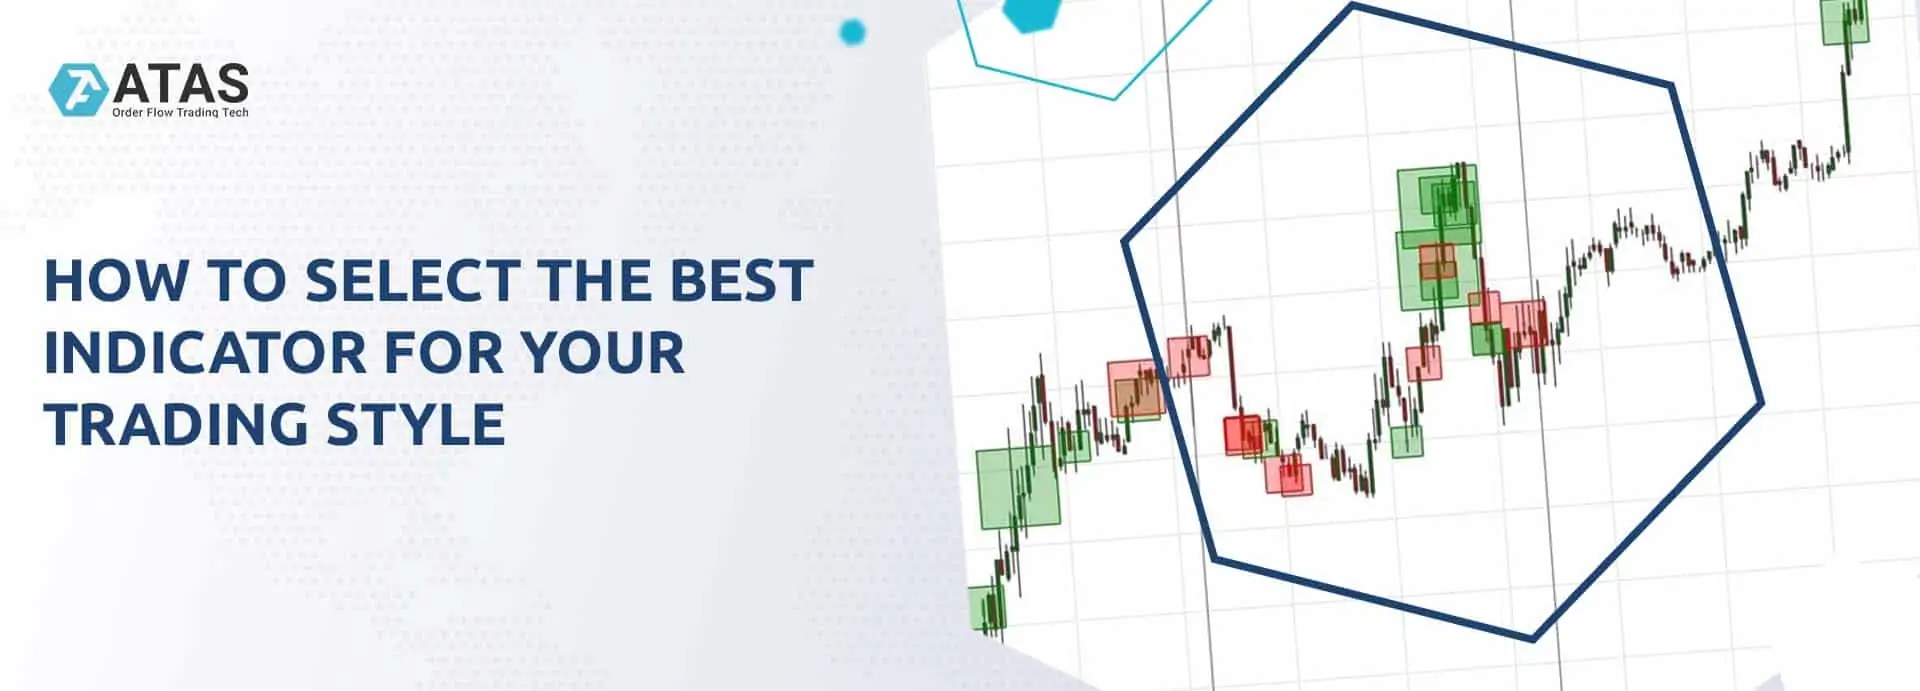 How to select the best indicator for your trading style